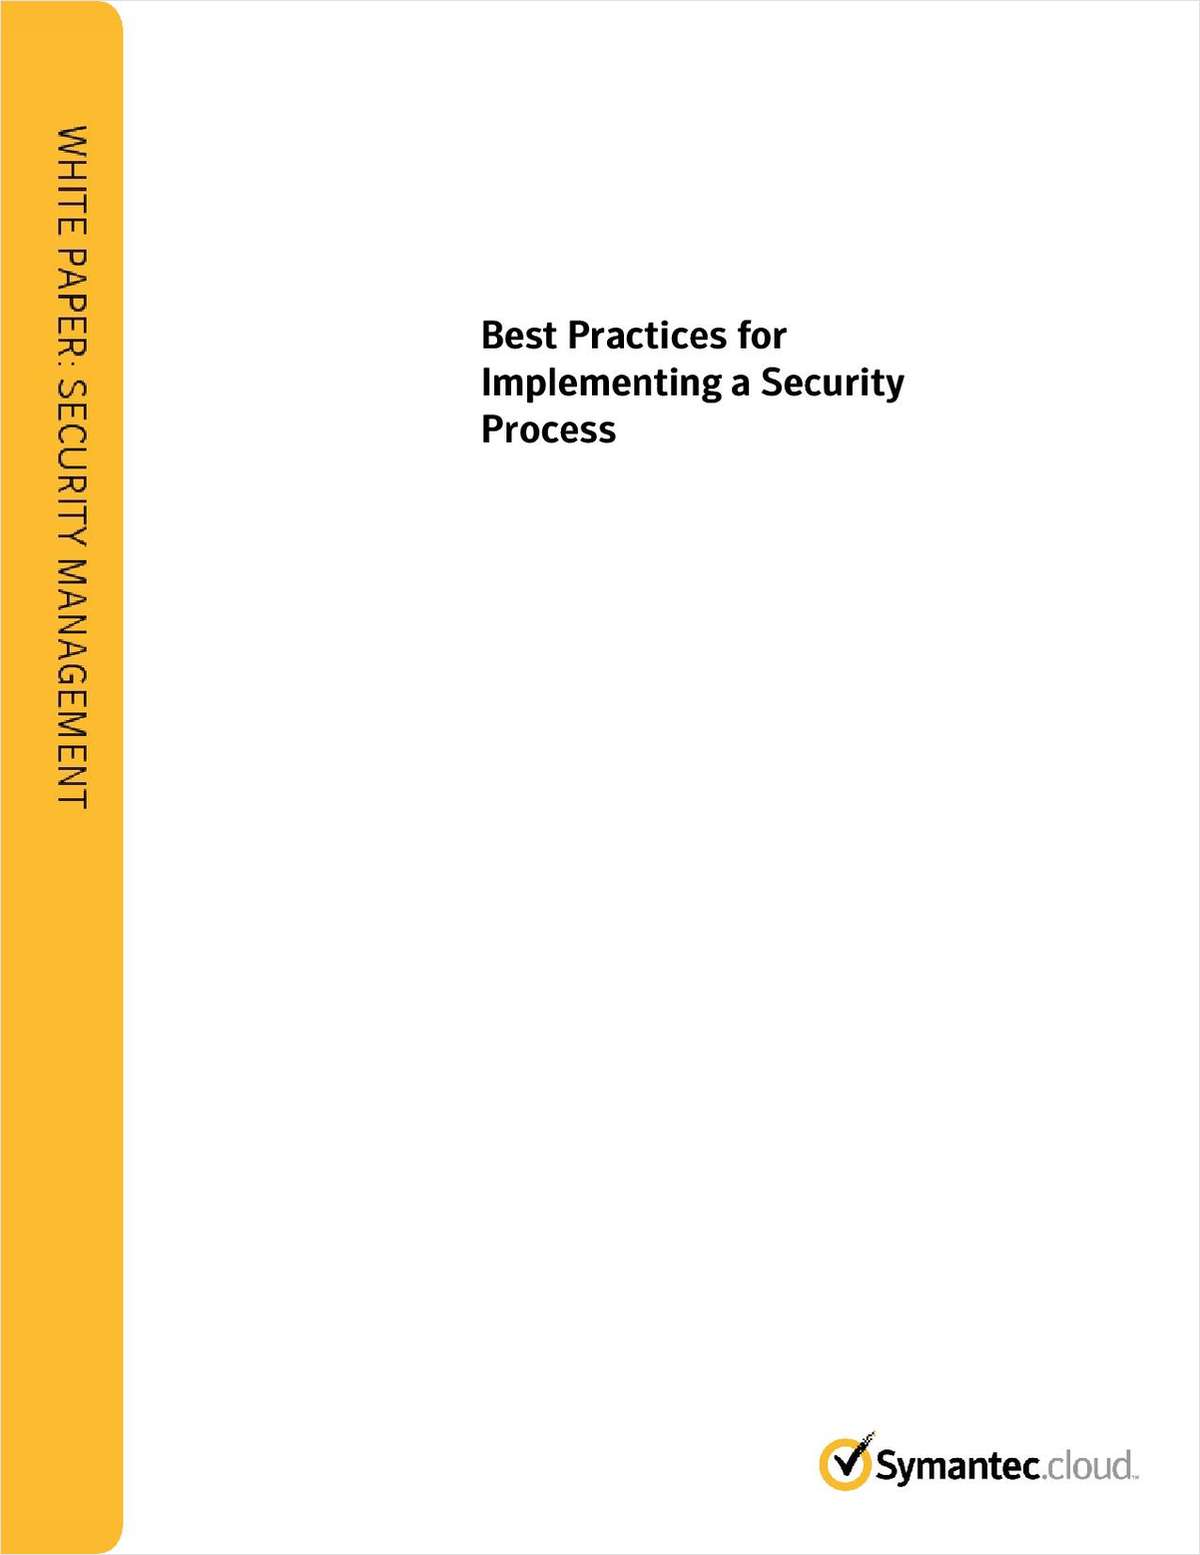 Best Practices for Implementing a Security Process